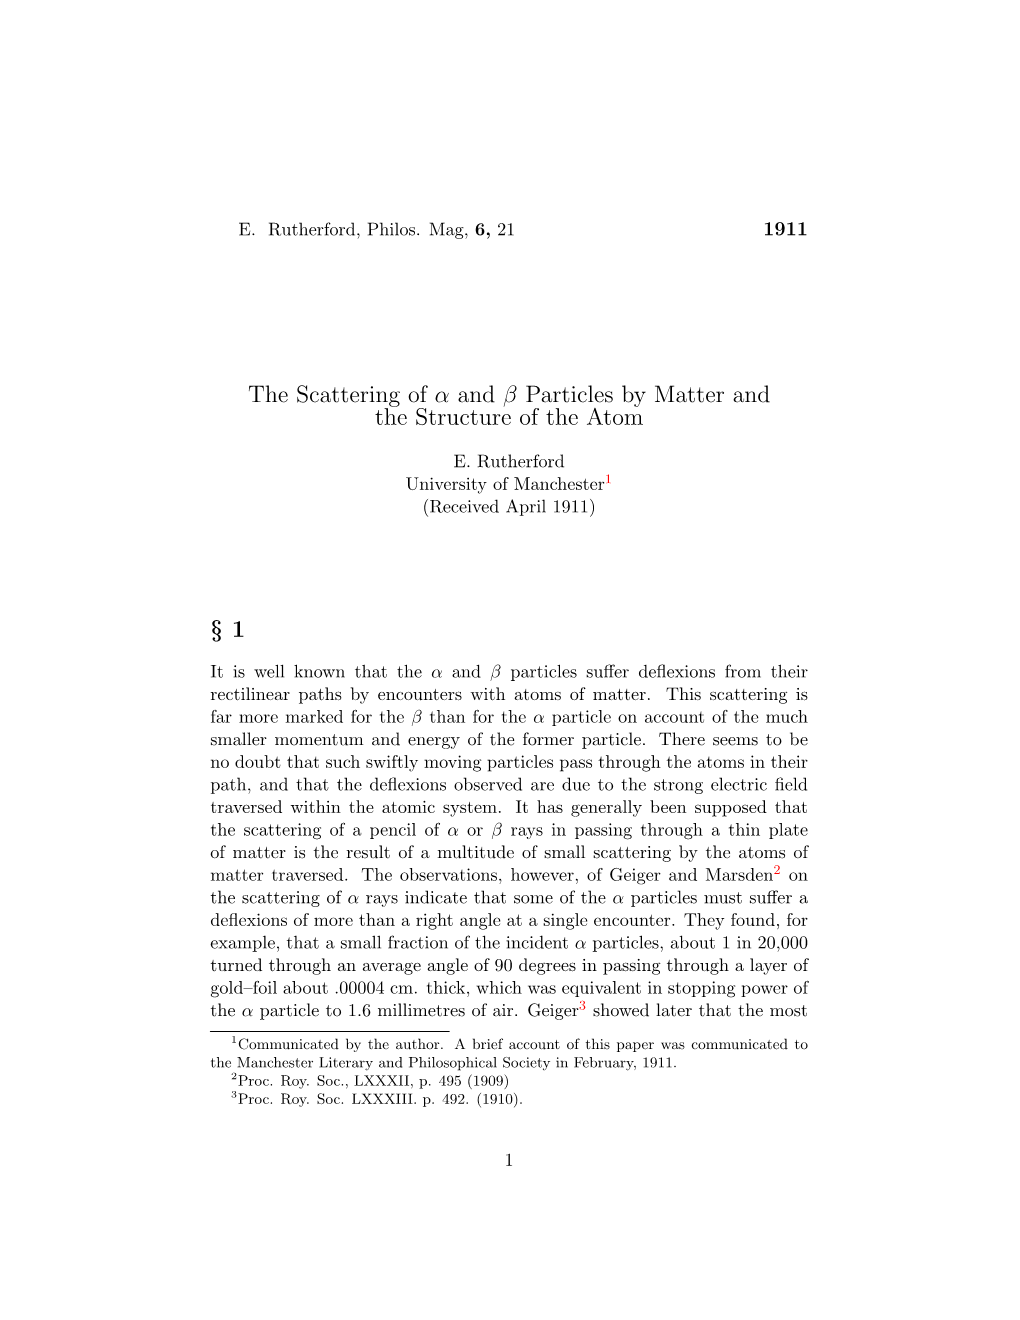 The Scattering of Α and Β Particles by Matter and the Structure of the Atom